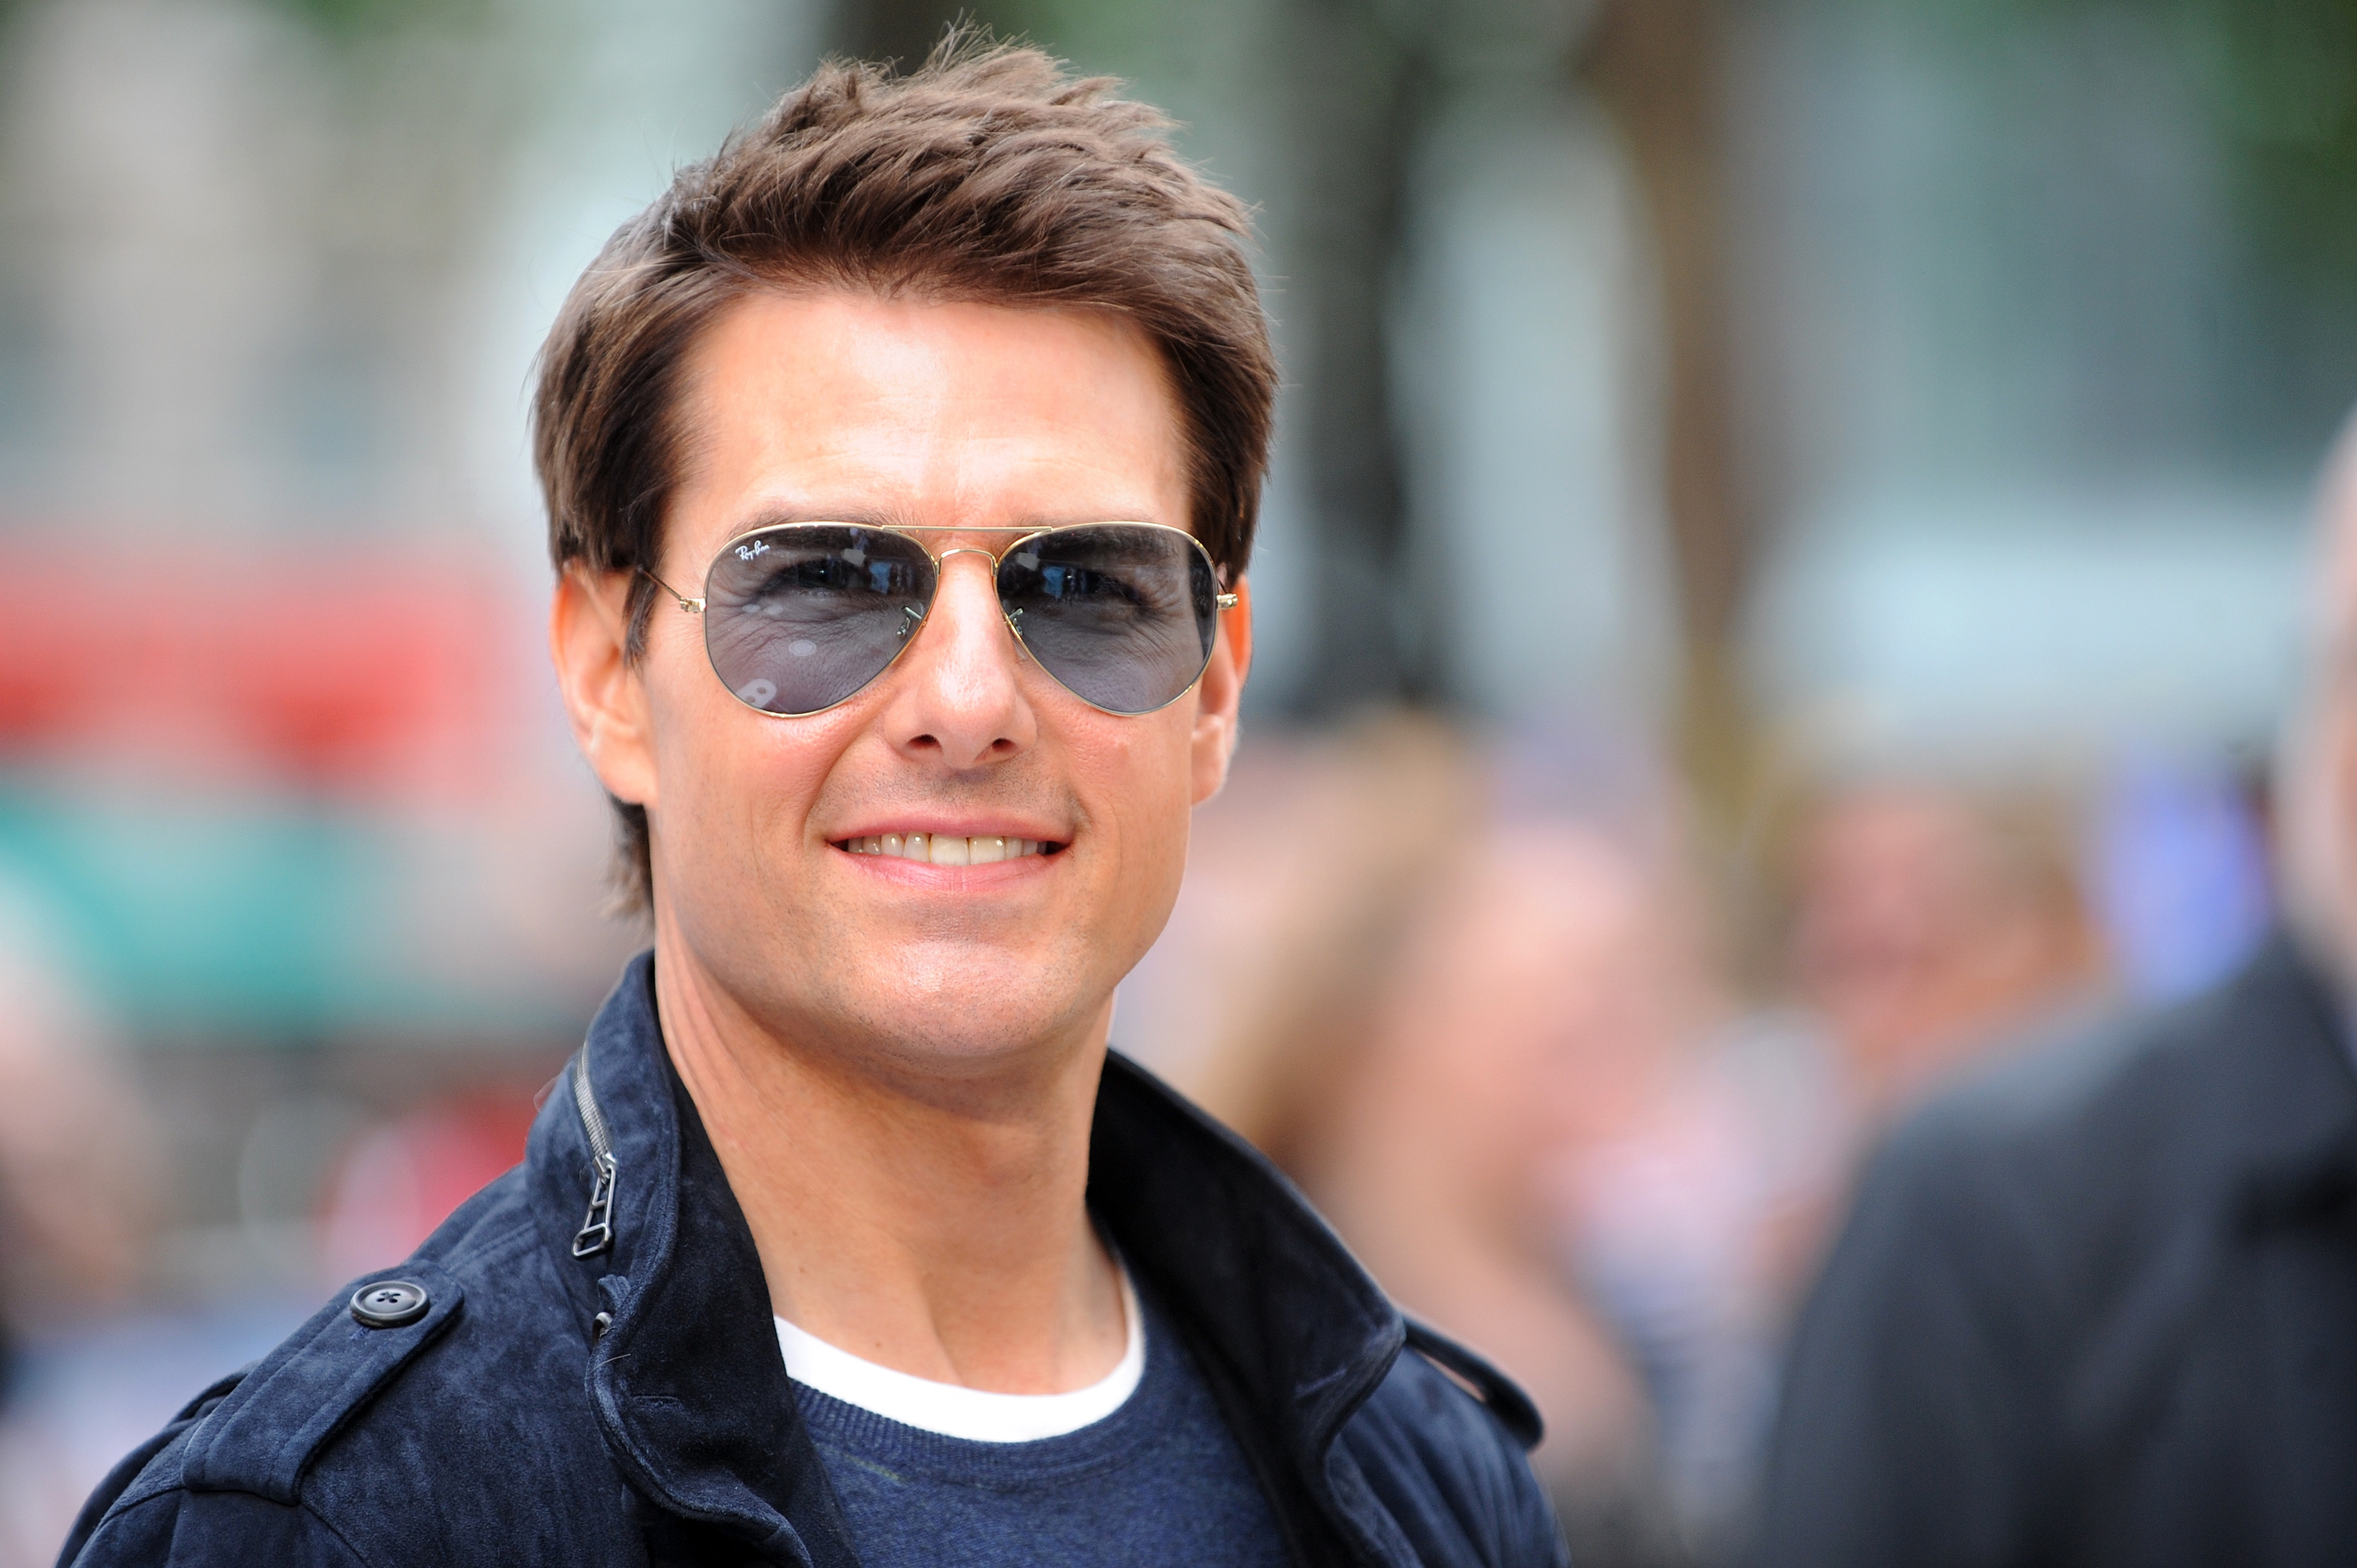 https://www.picsofcelebrities.com/celebrity/tom-cruise/pictures/large/tom-cruise-photos.jpg